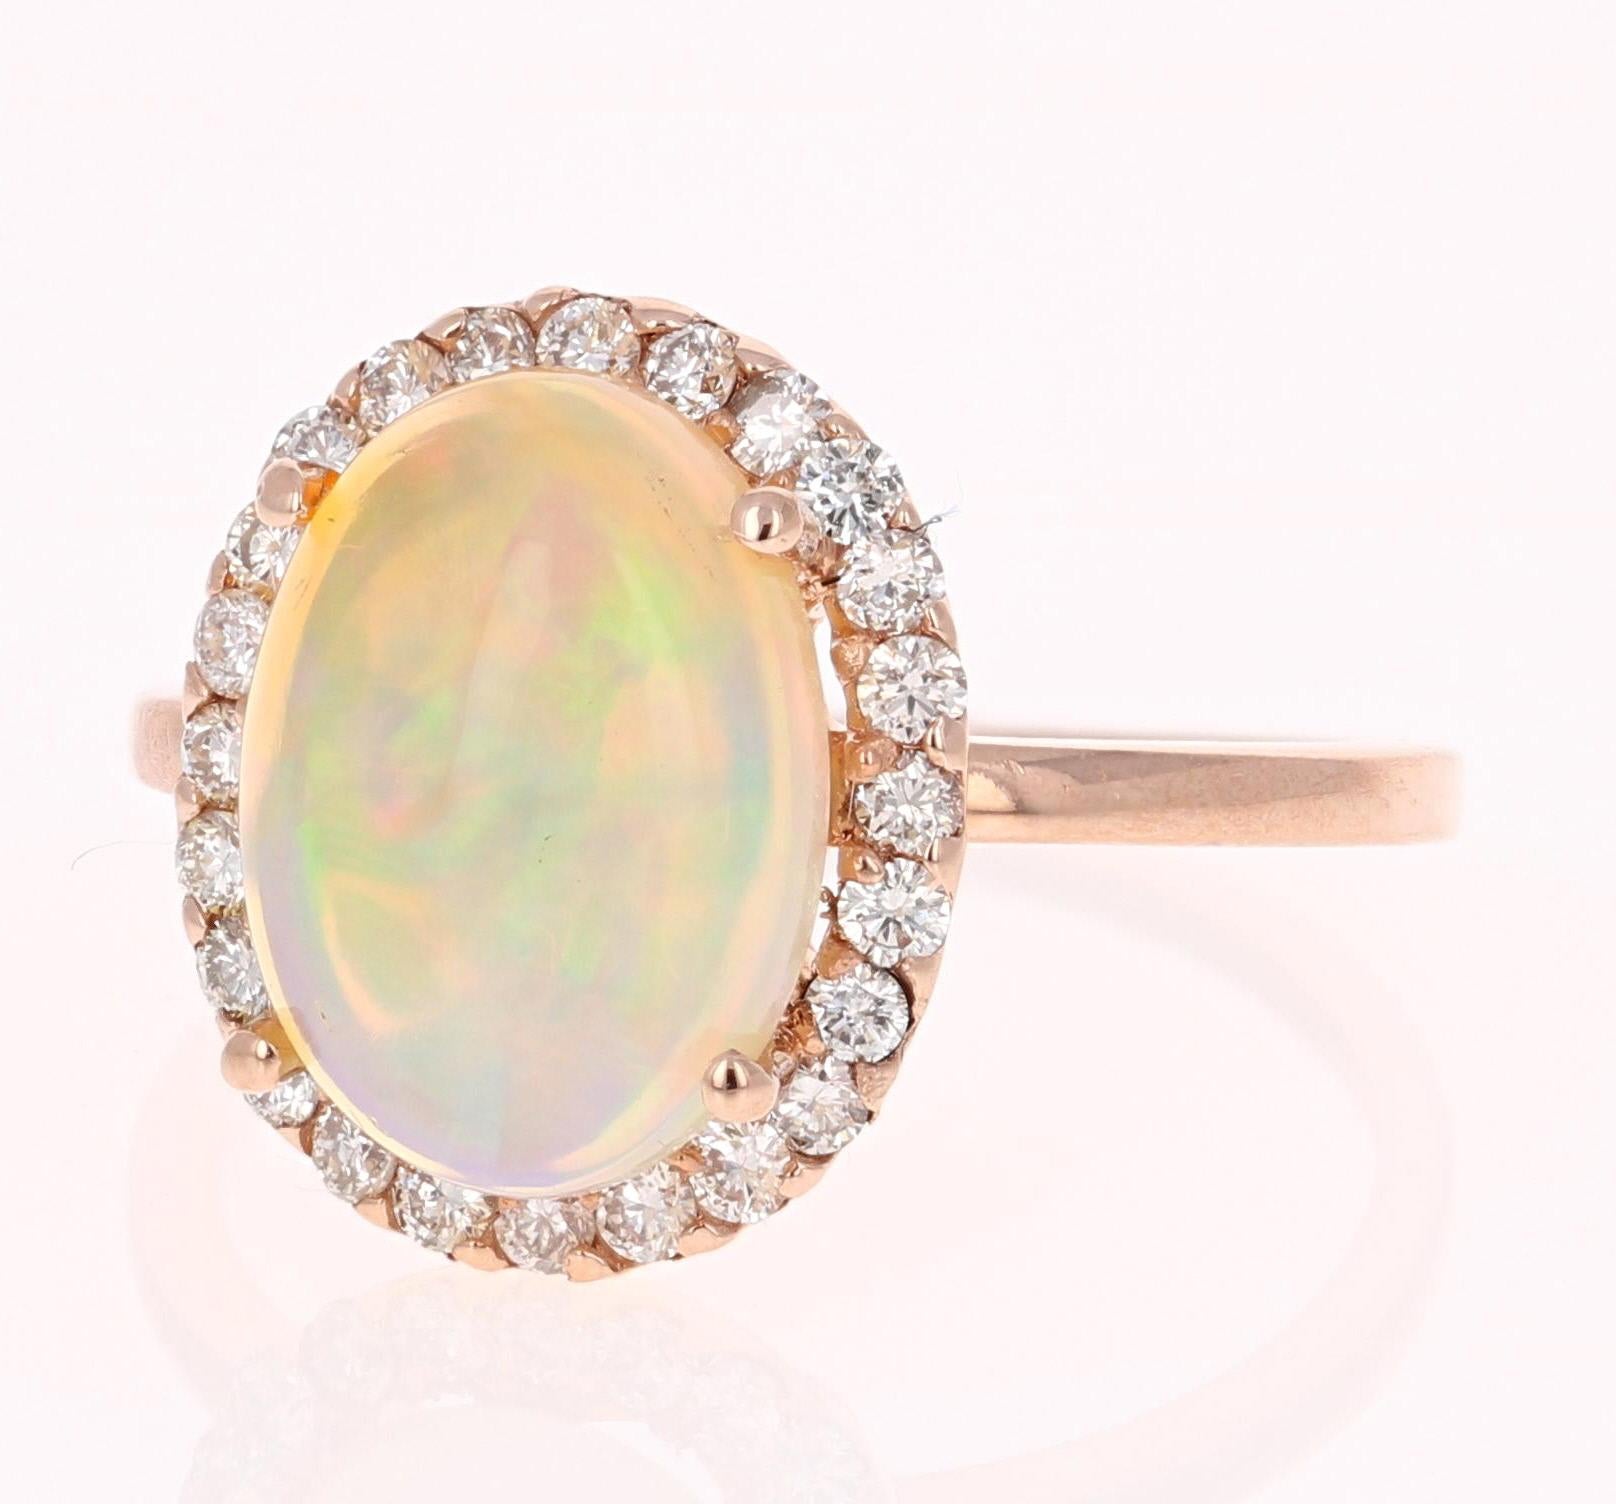 Opulent 2.95 Carat Opal and Diamond Ring in 14K Rose Gold.
The beautiful Opal with its striking flashes of color weighs 2.55 carats. It is surrounded by 24 Round Cut Diamonds that weigh 0.40 carats (Clarity: VS2, Color: H).  This 14K Rose Gold ring